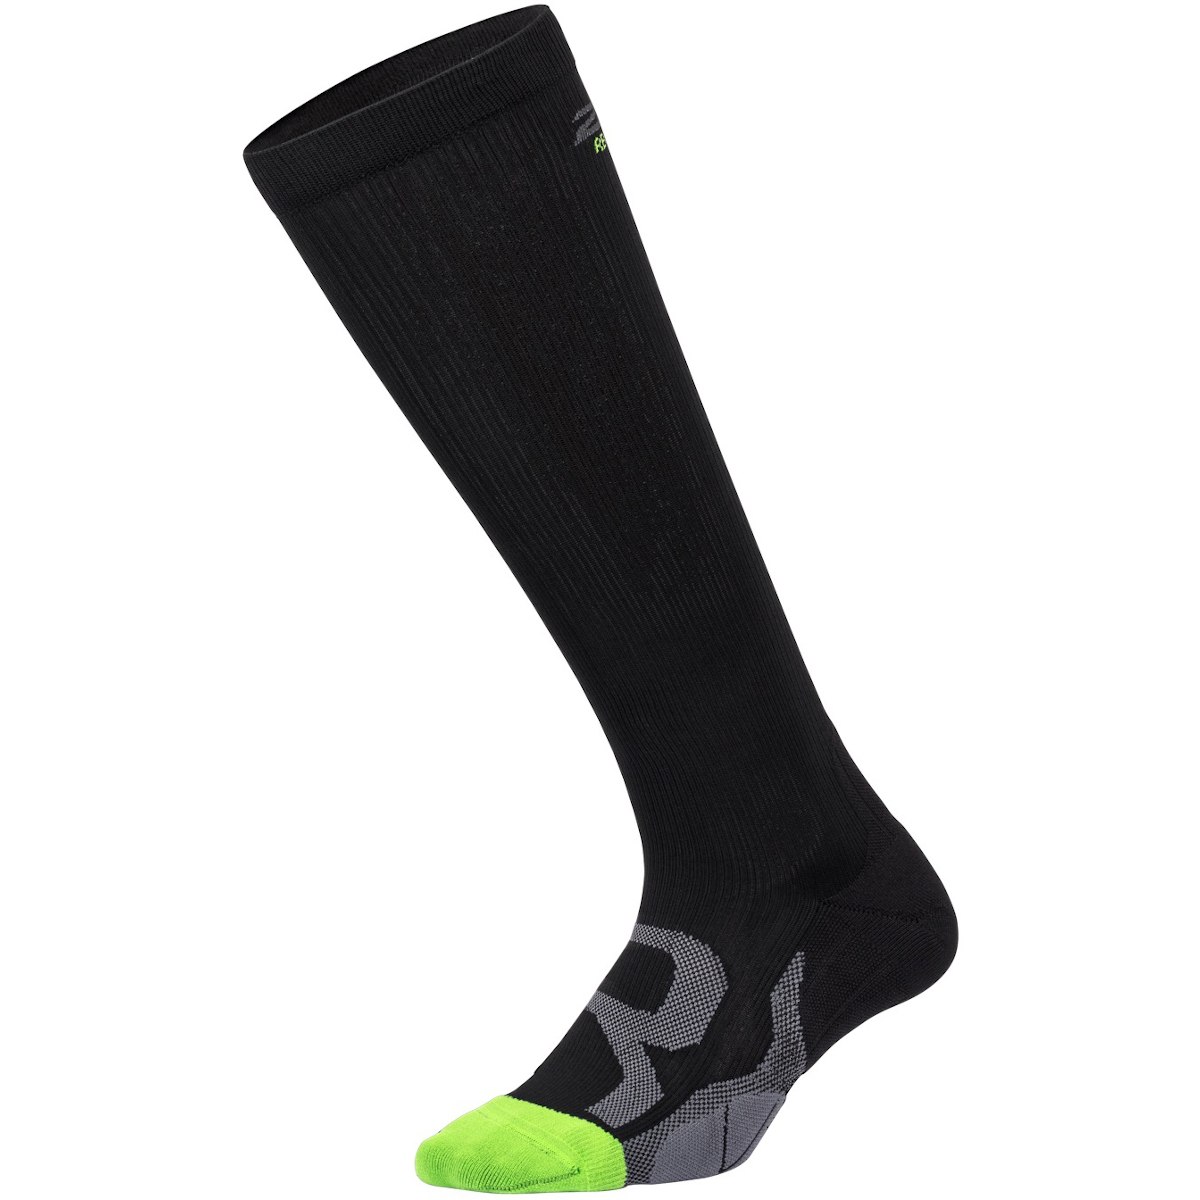 Image of 2XU Compression Socks for Recovery - wide - black